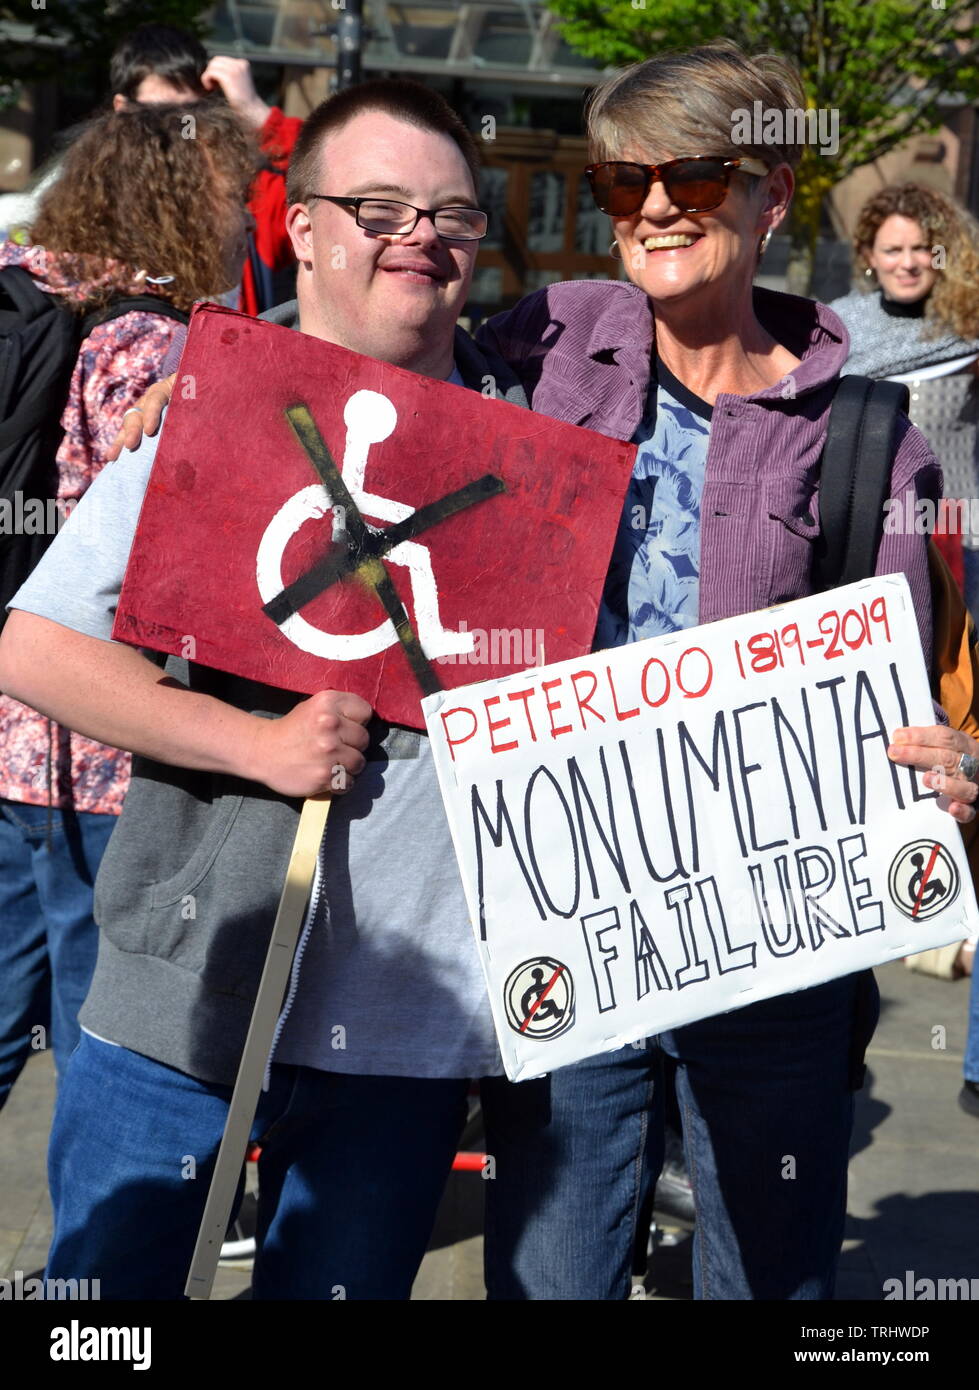 June 6, 2019. Actress and writer Ali Briggs (right) who plays Freda Burgess in TV soap Coronation Street joins disabled people and supporters protesting at the site where a memorial to commemorate the Peterloo massacre of 1819 is being built in Manchester uk. The memorial, developed by Manchester City Council, will currently be a landscaped hill made out of concentric steps. The protesters argue that it is inaccessible for many disabled people and should be amended. Stock Photo